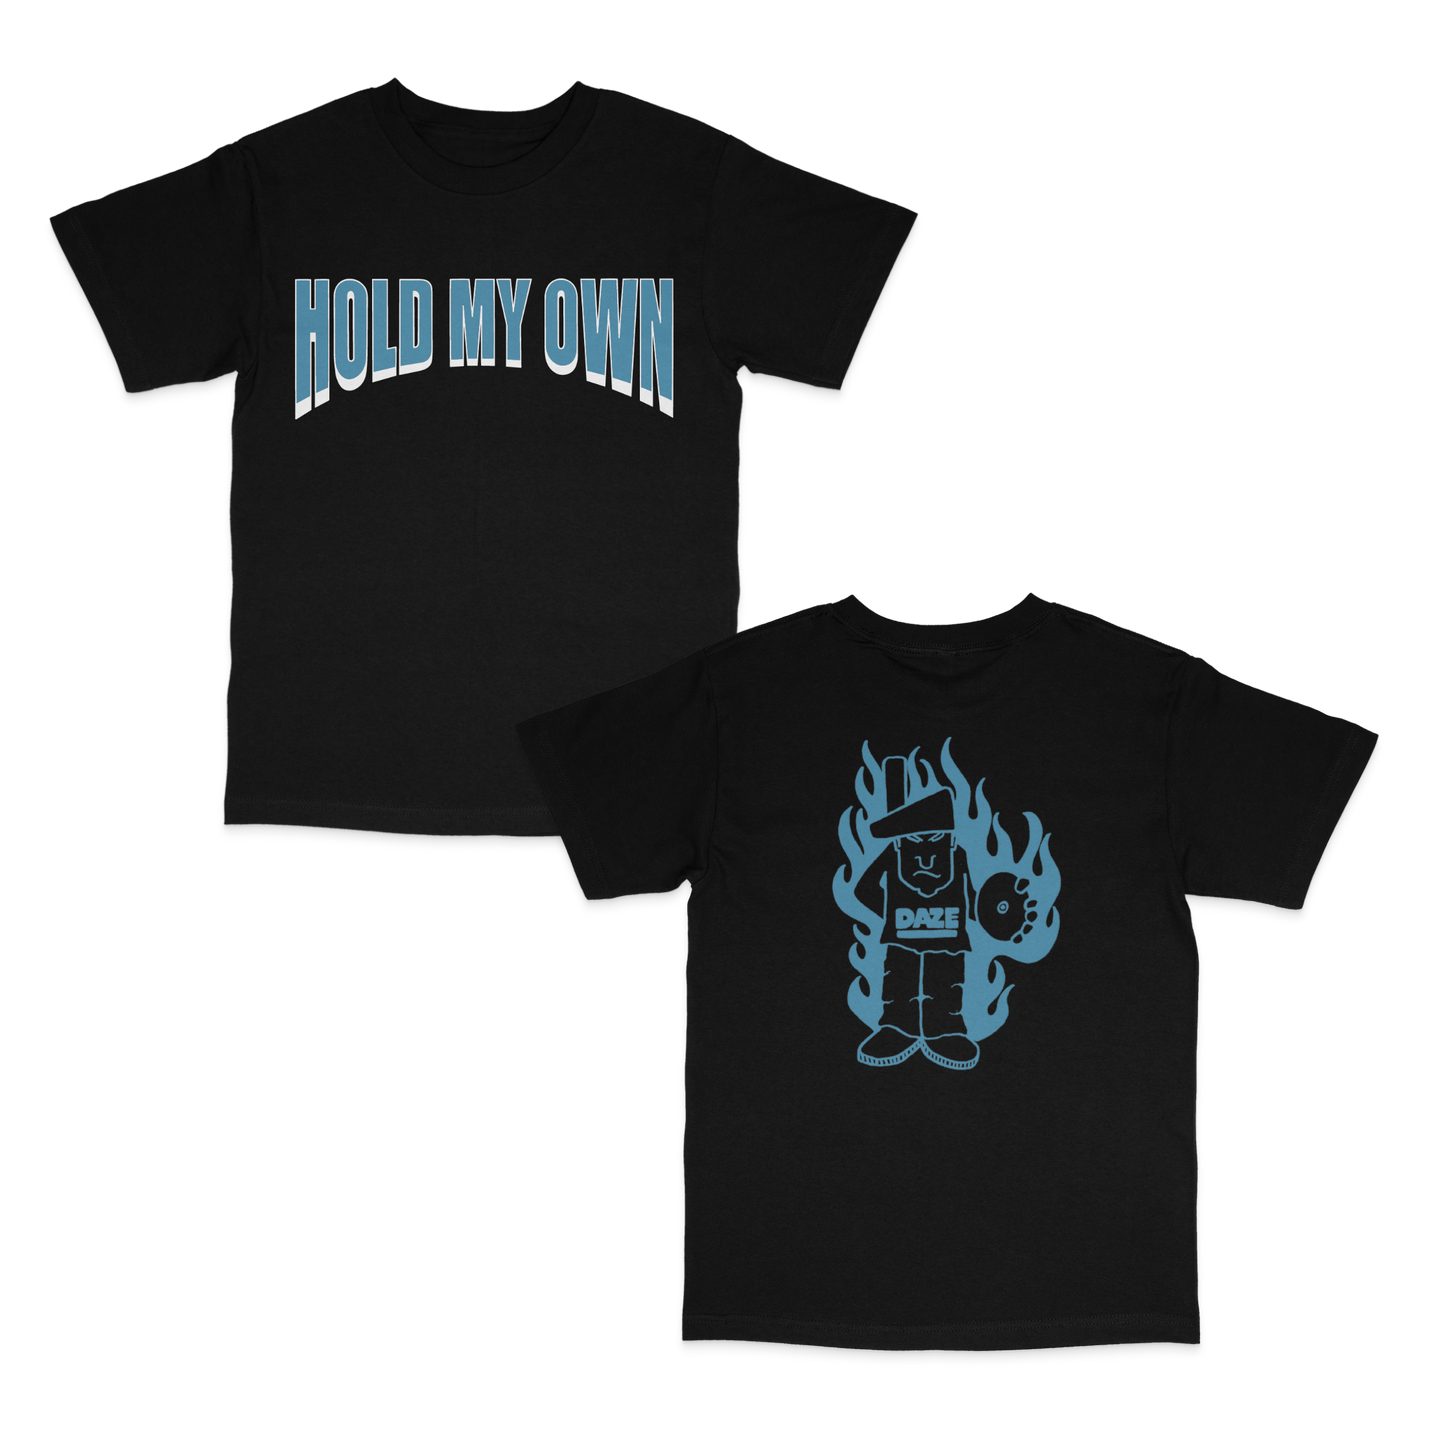 Hold My Own - Arch T-Shirt